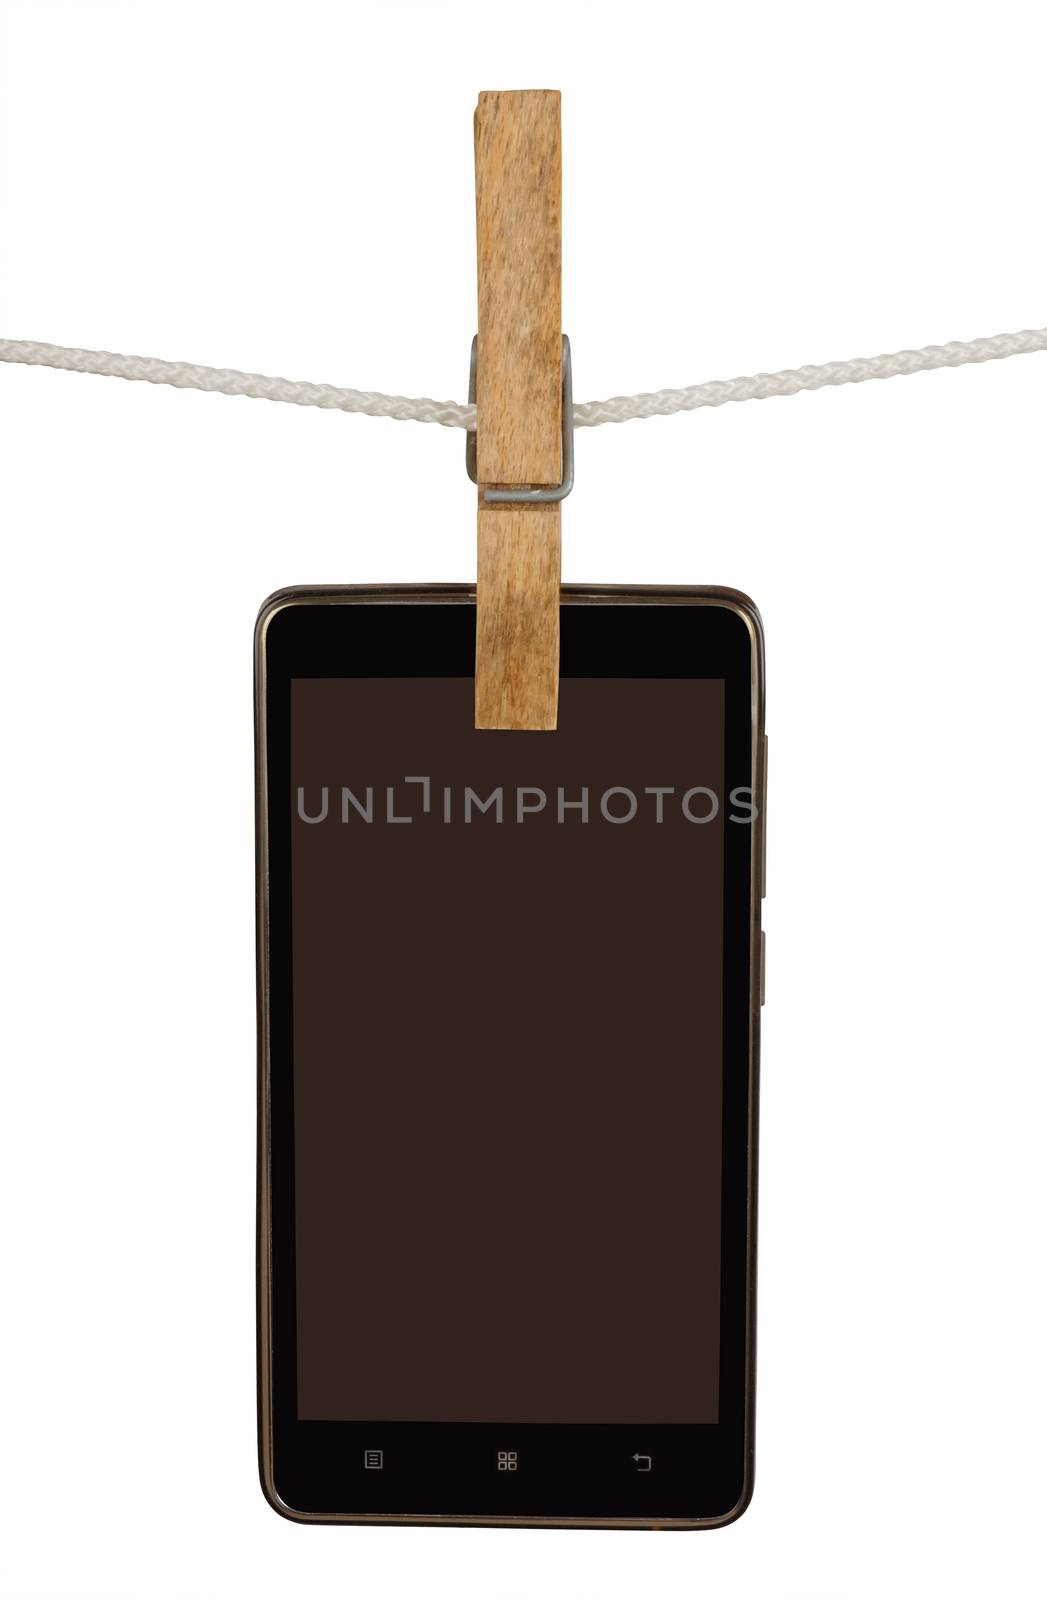 Smartphone on clothesline by sewer12